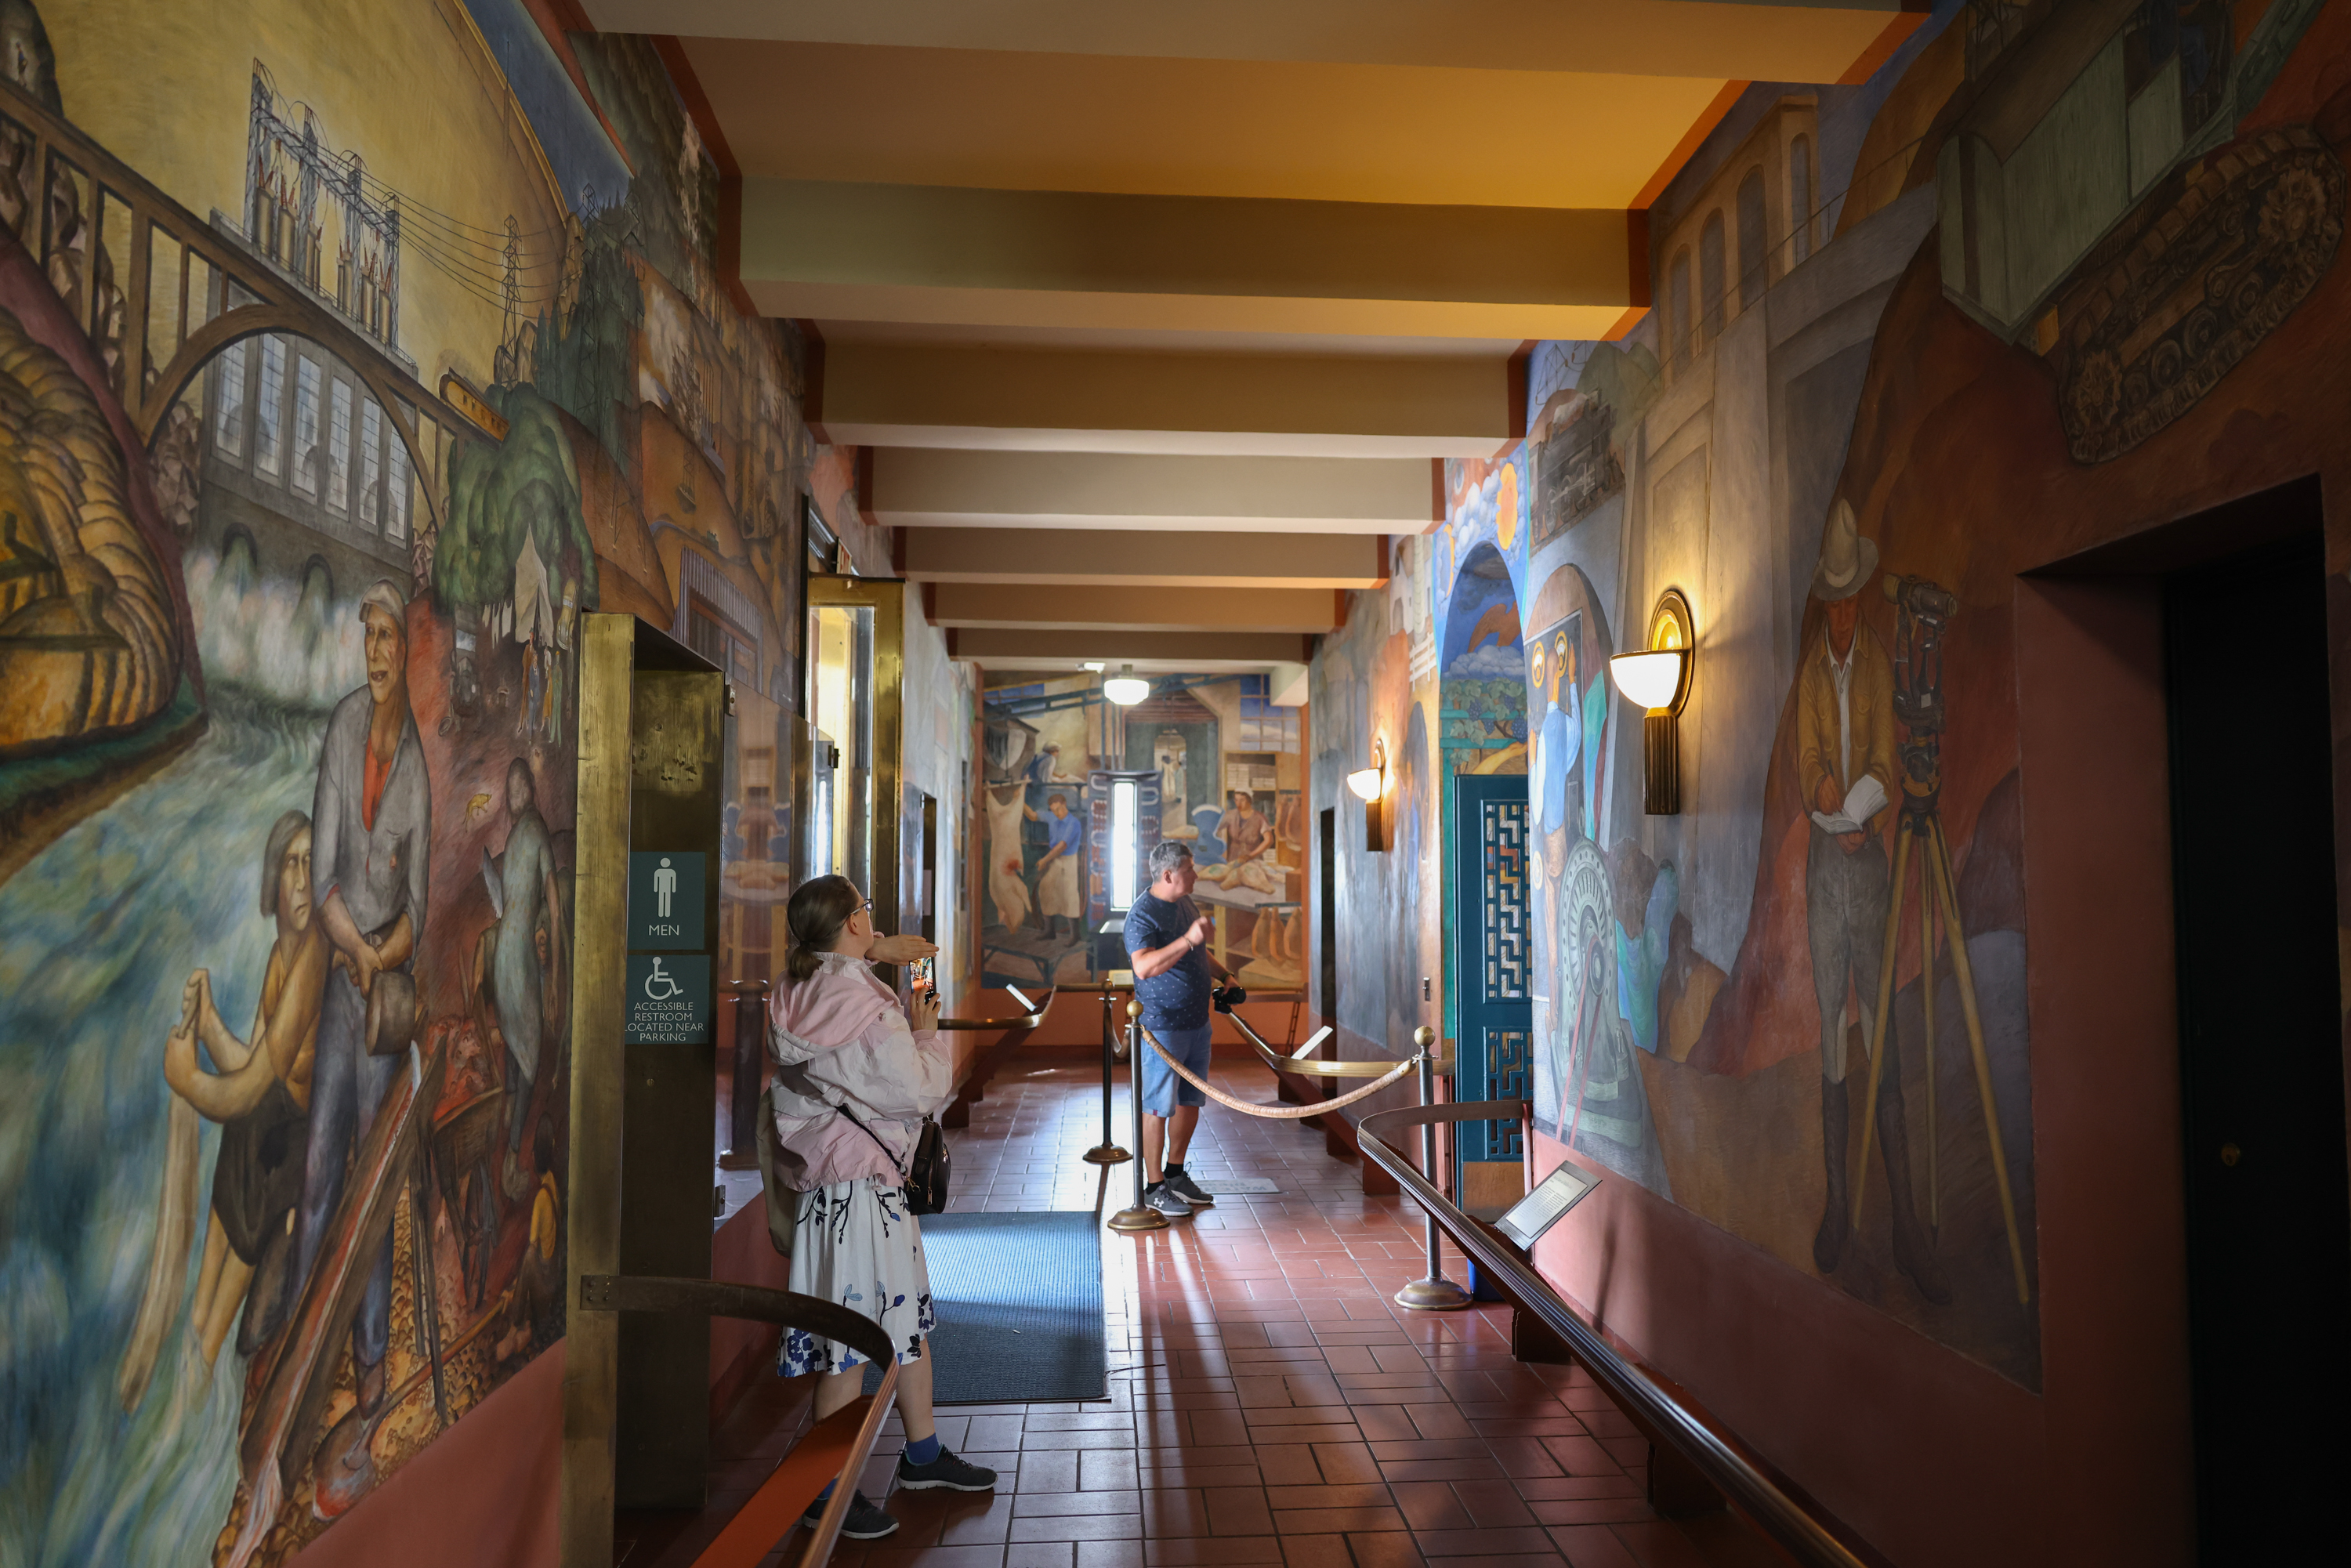 Murals inside the halls of Coit Tower